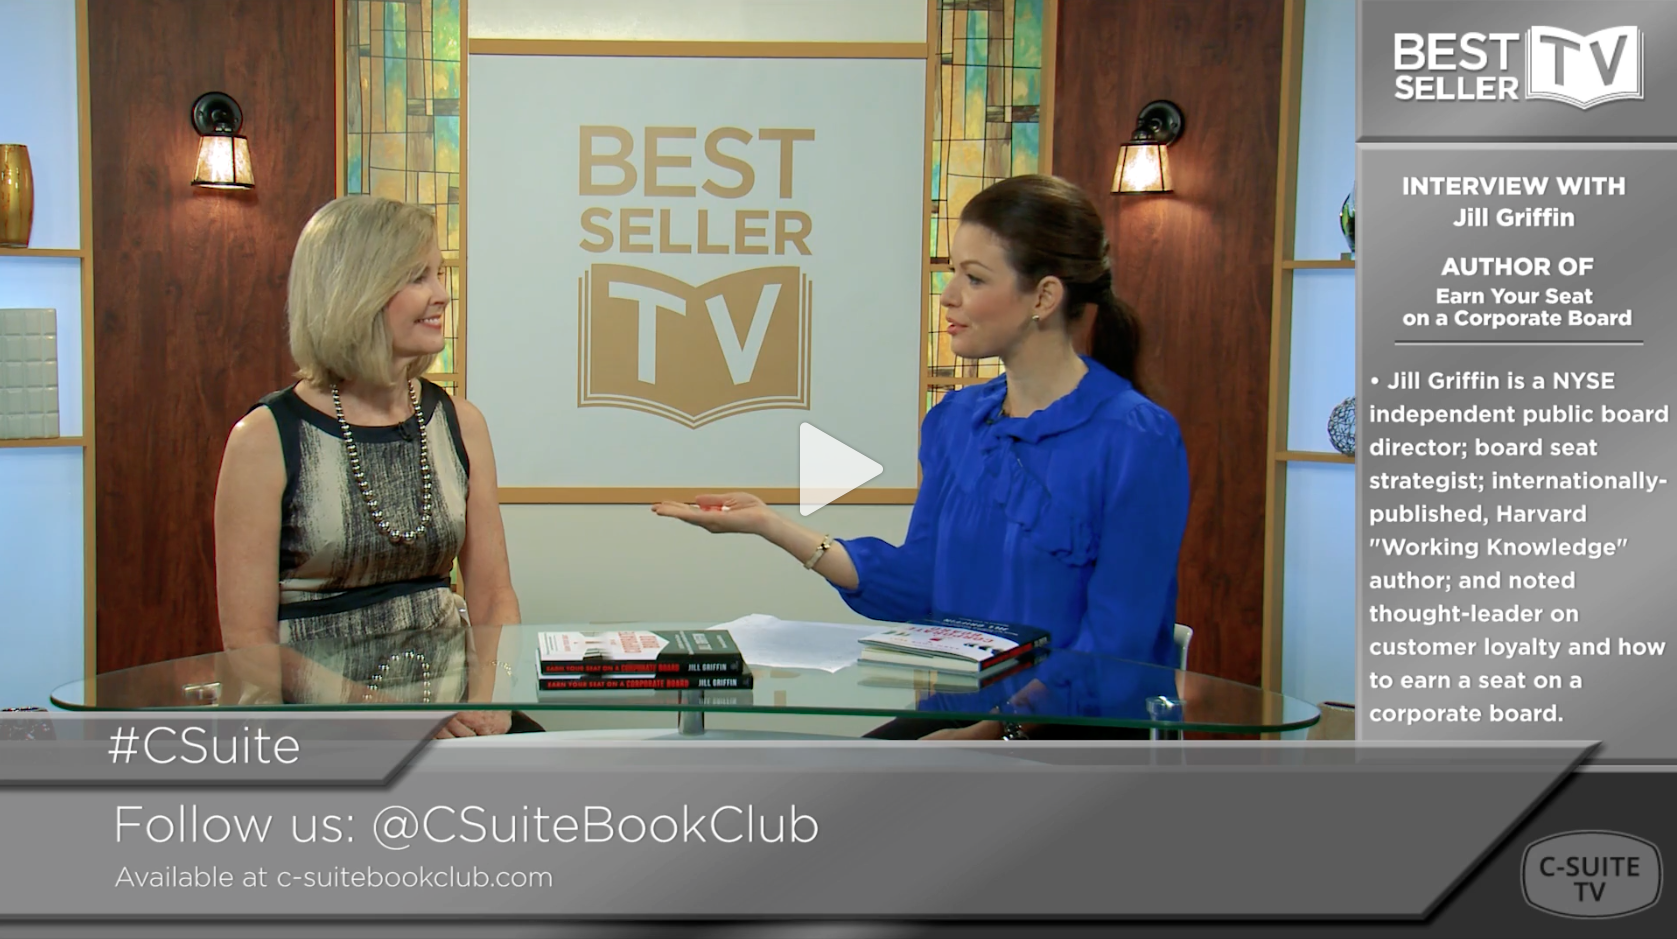 I had so much fun talking to C-Suite and Tara on BestSellerTV.com!